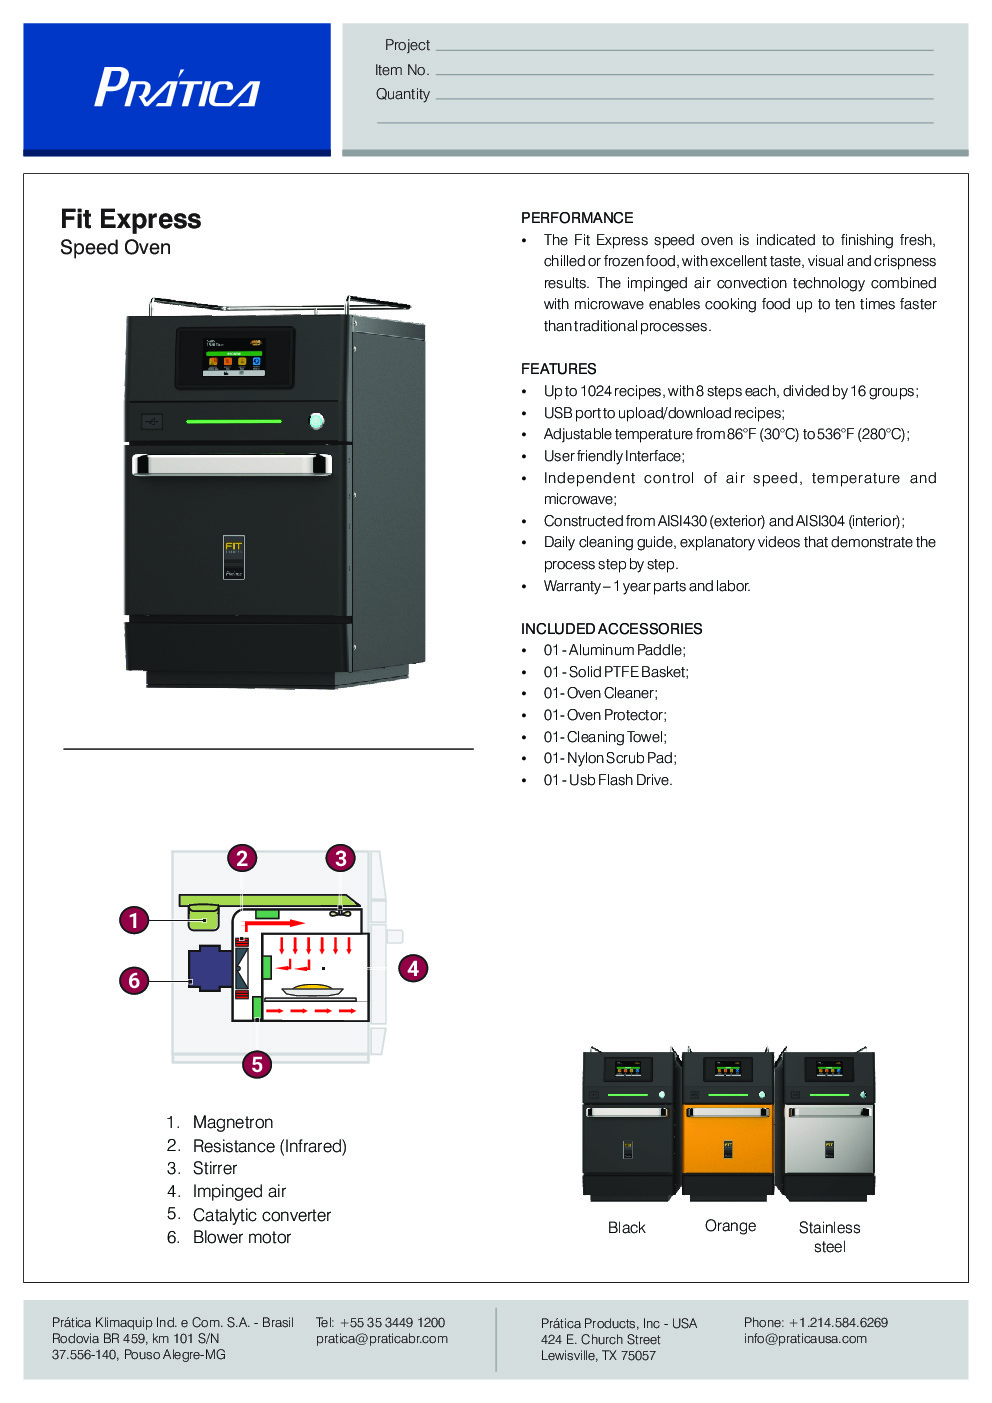 Pratica Products Inc FIT EXPRESS Combination Rapid Cook Oven